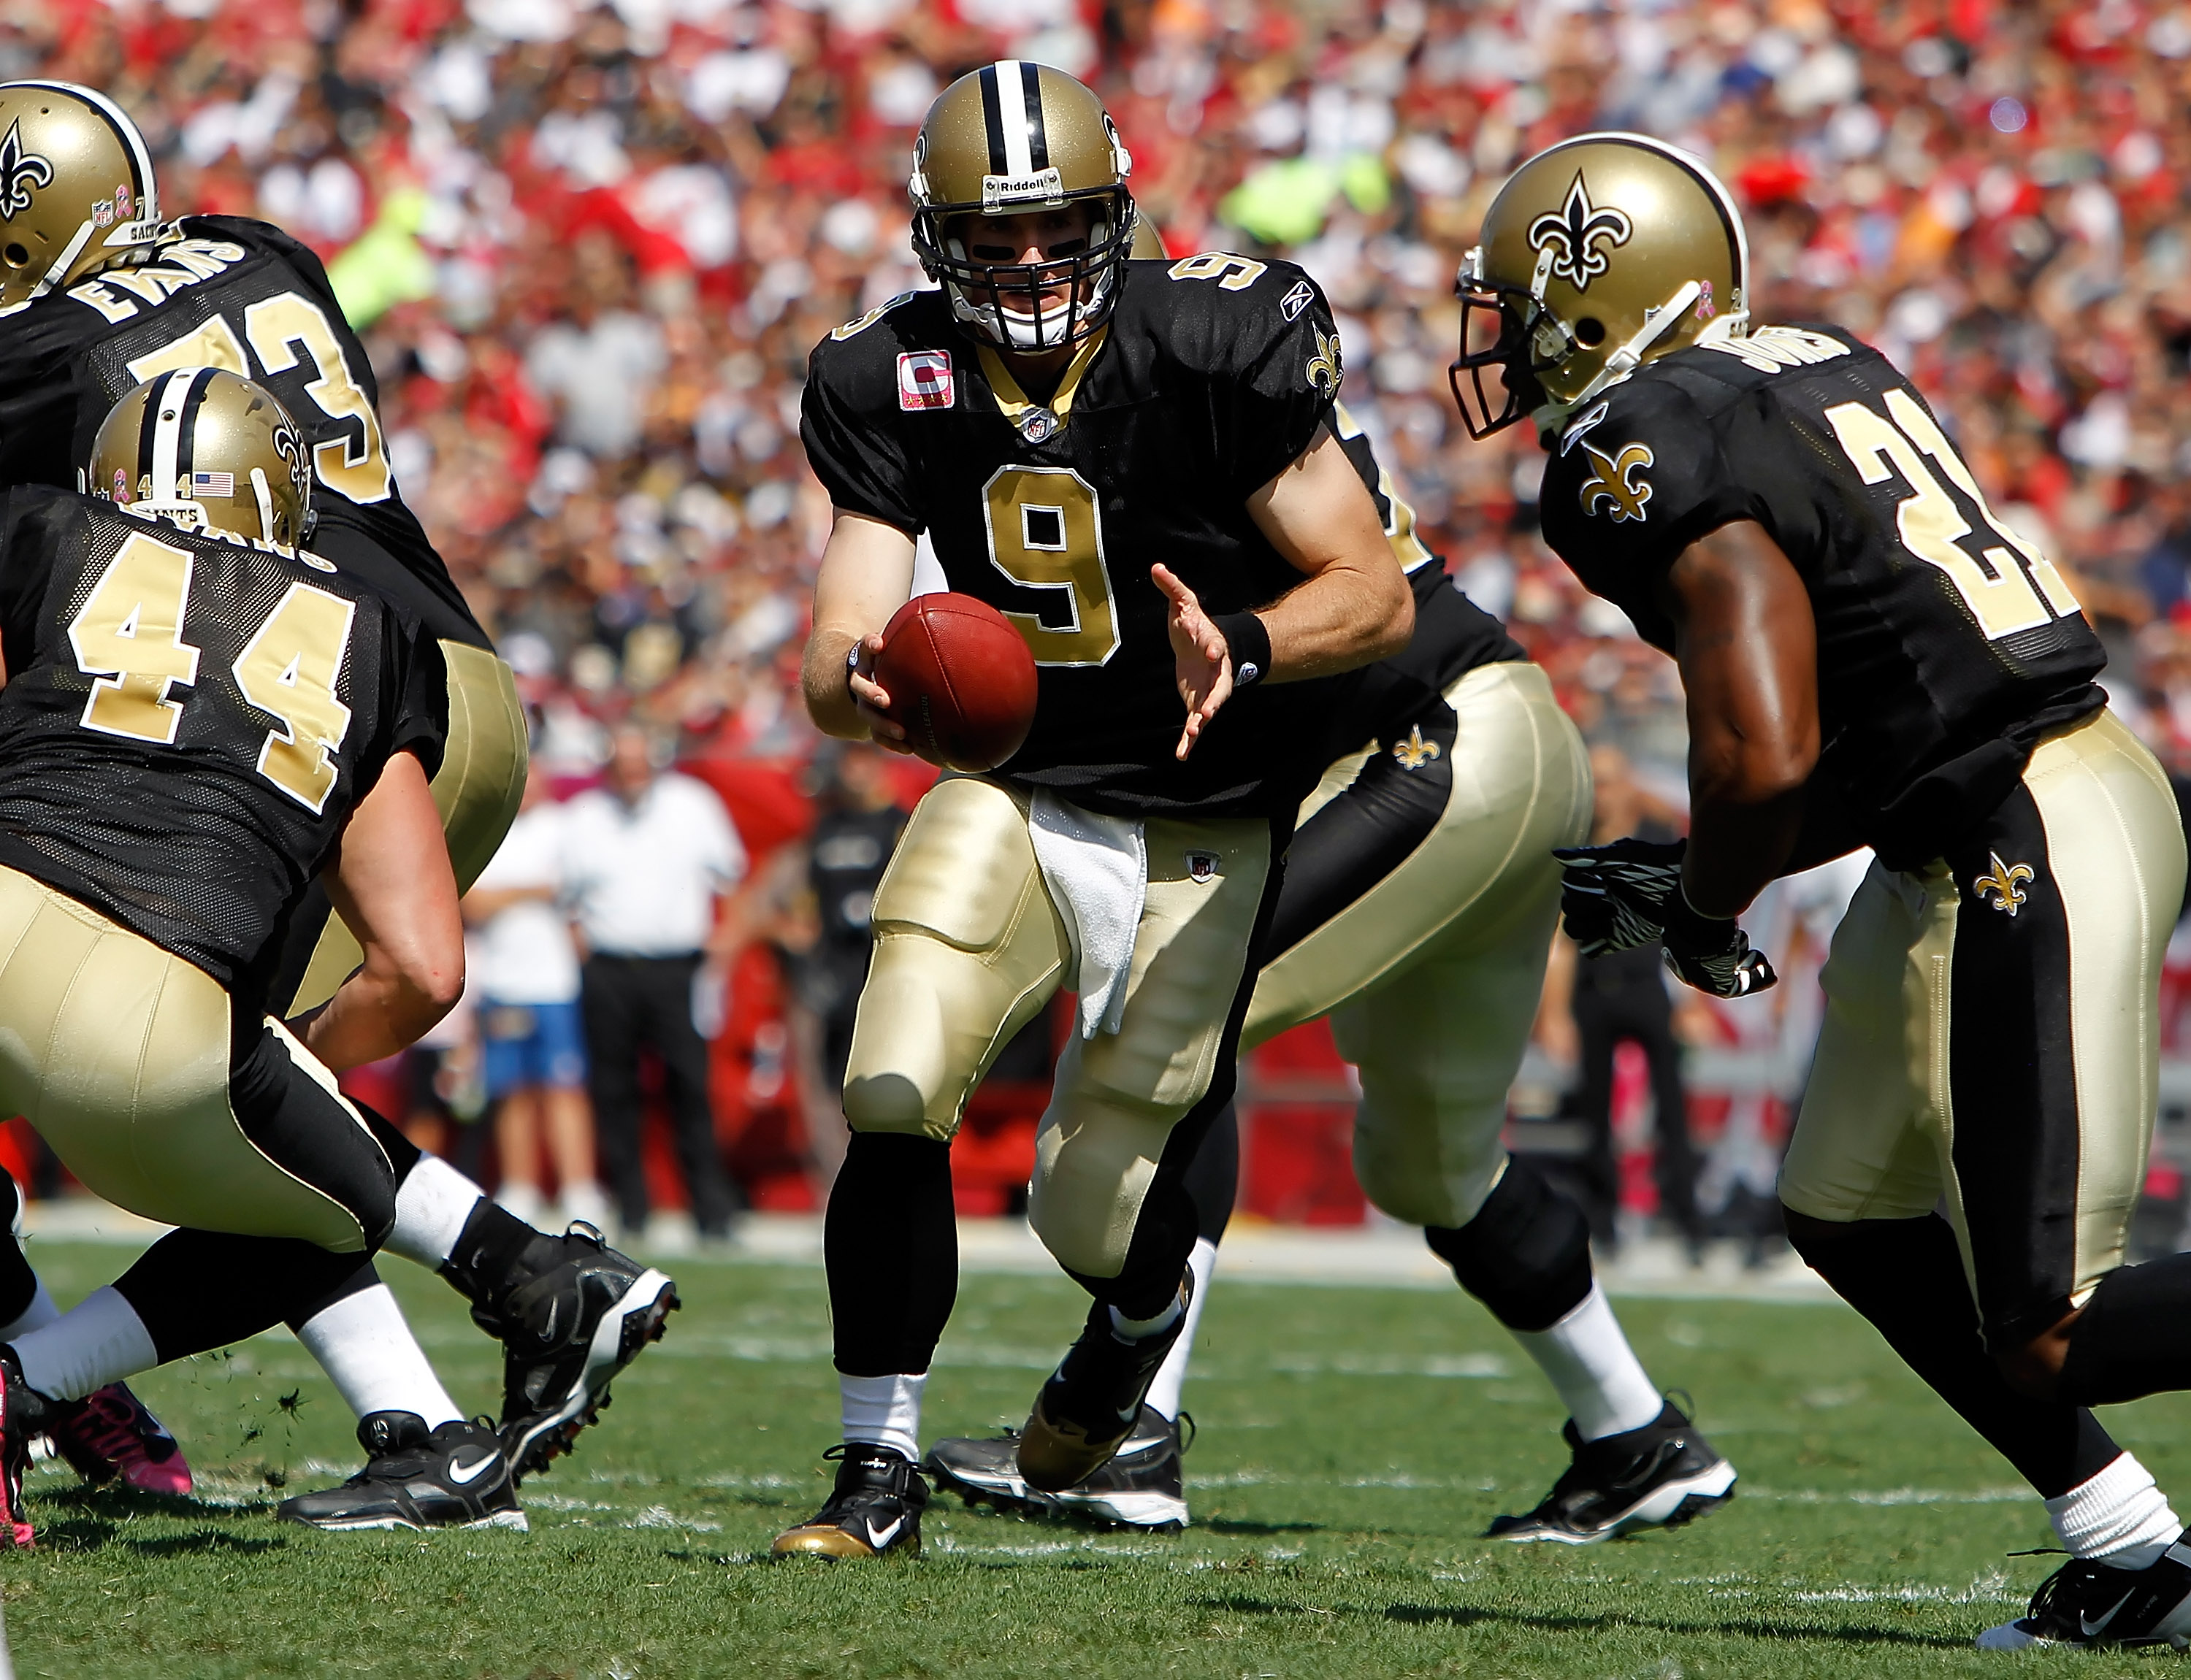 TAMPA, FL - OCTOBER 17:  Quarterback Drew Brees #9 of the New Orleans Saints hands the ball off against the Tampa Bay Buccaneers during the game at Raymond James Stadium on October 17, 2010 in Tampa, Florida.  (Photo by J. Meric/Getty Images)